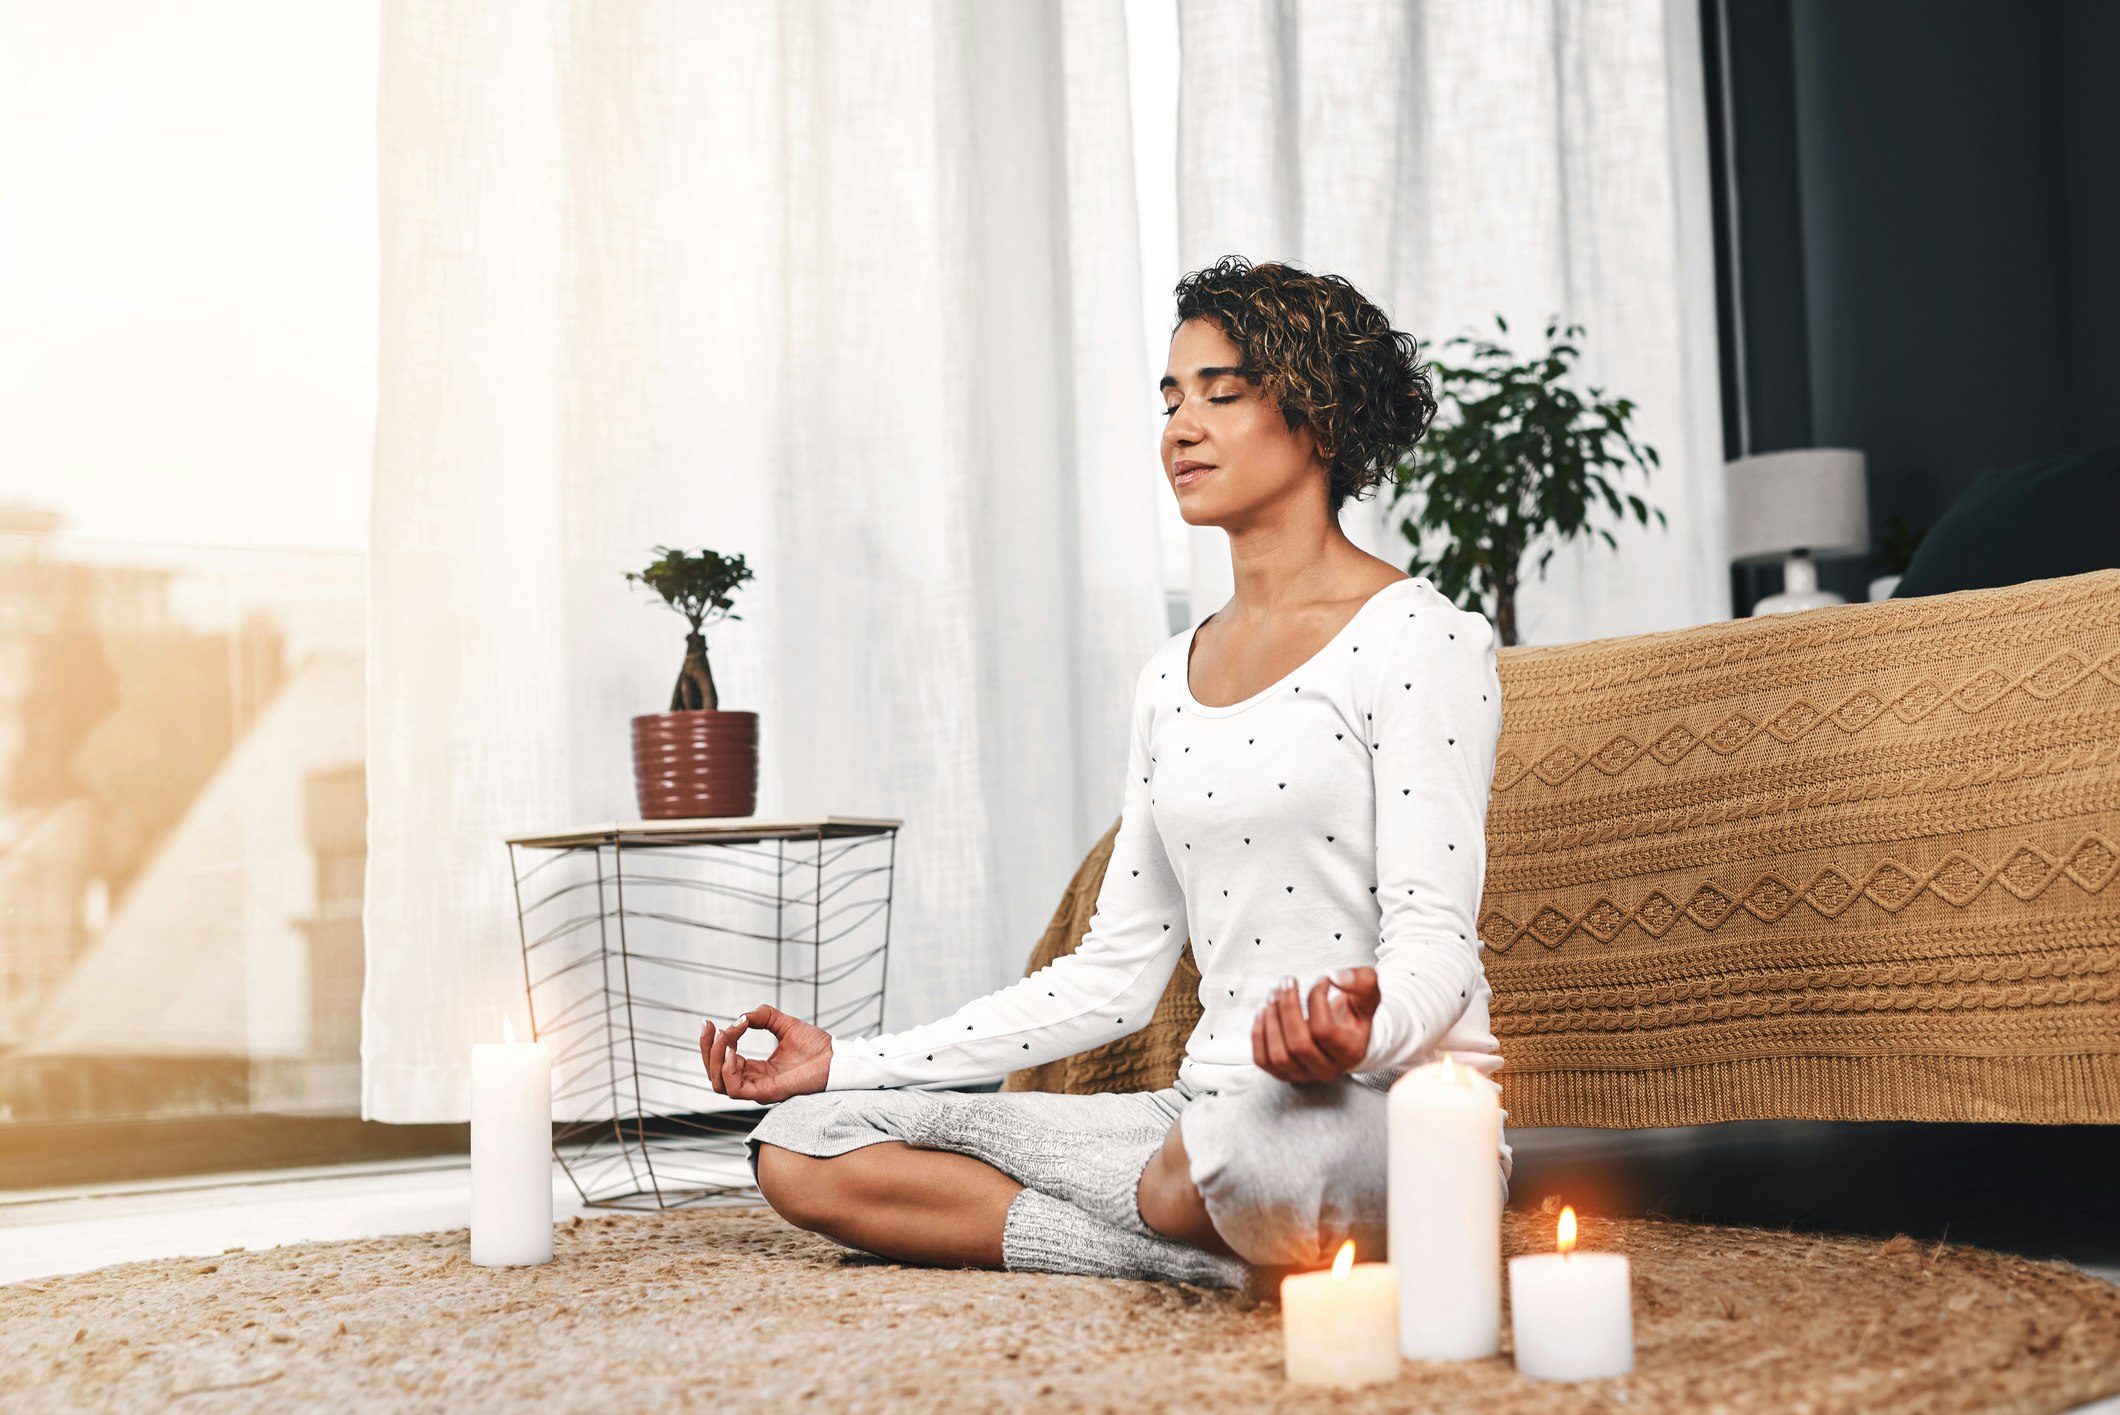 A woman with short dark hair sits on the floor of her bedroom meditating, surrounded by candles and decor in soothing neutral tones